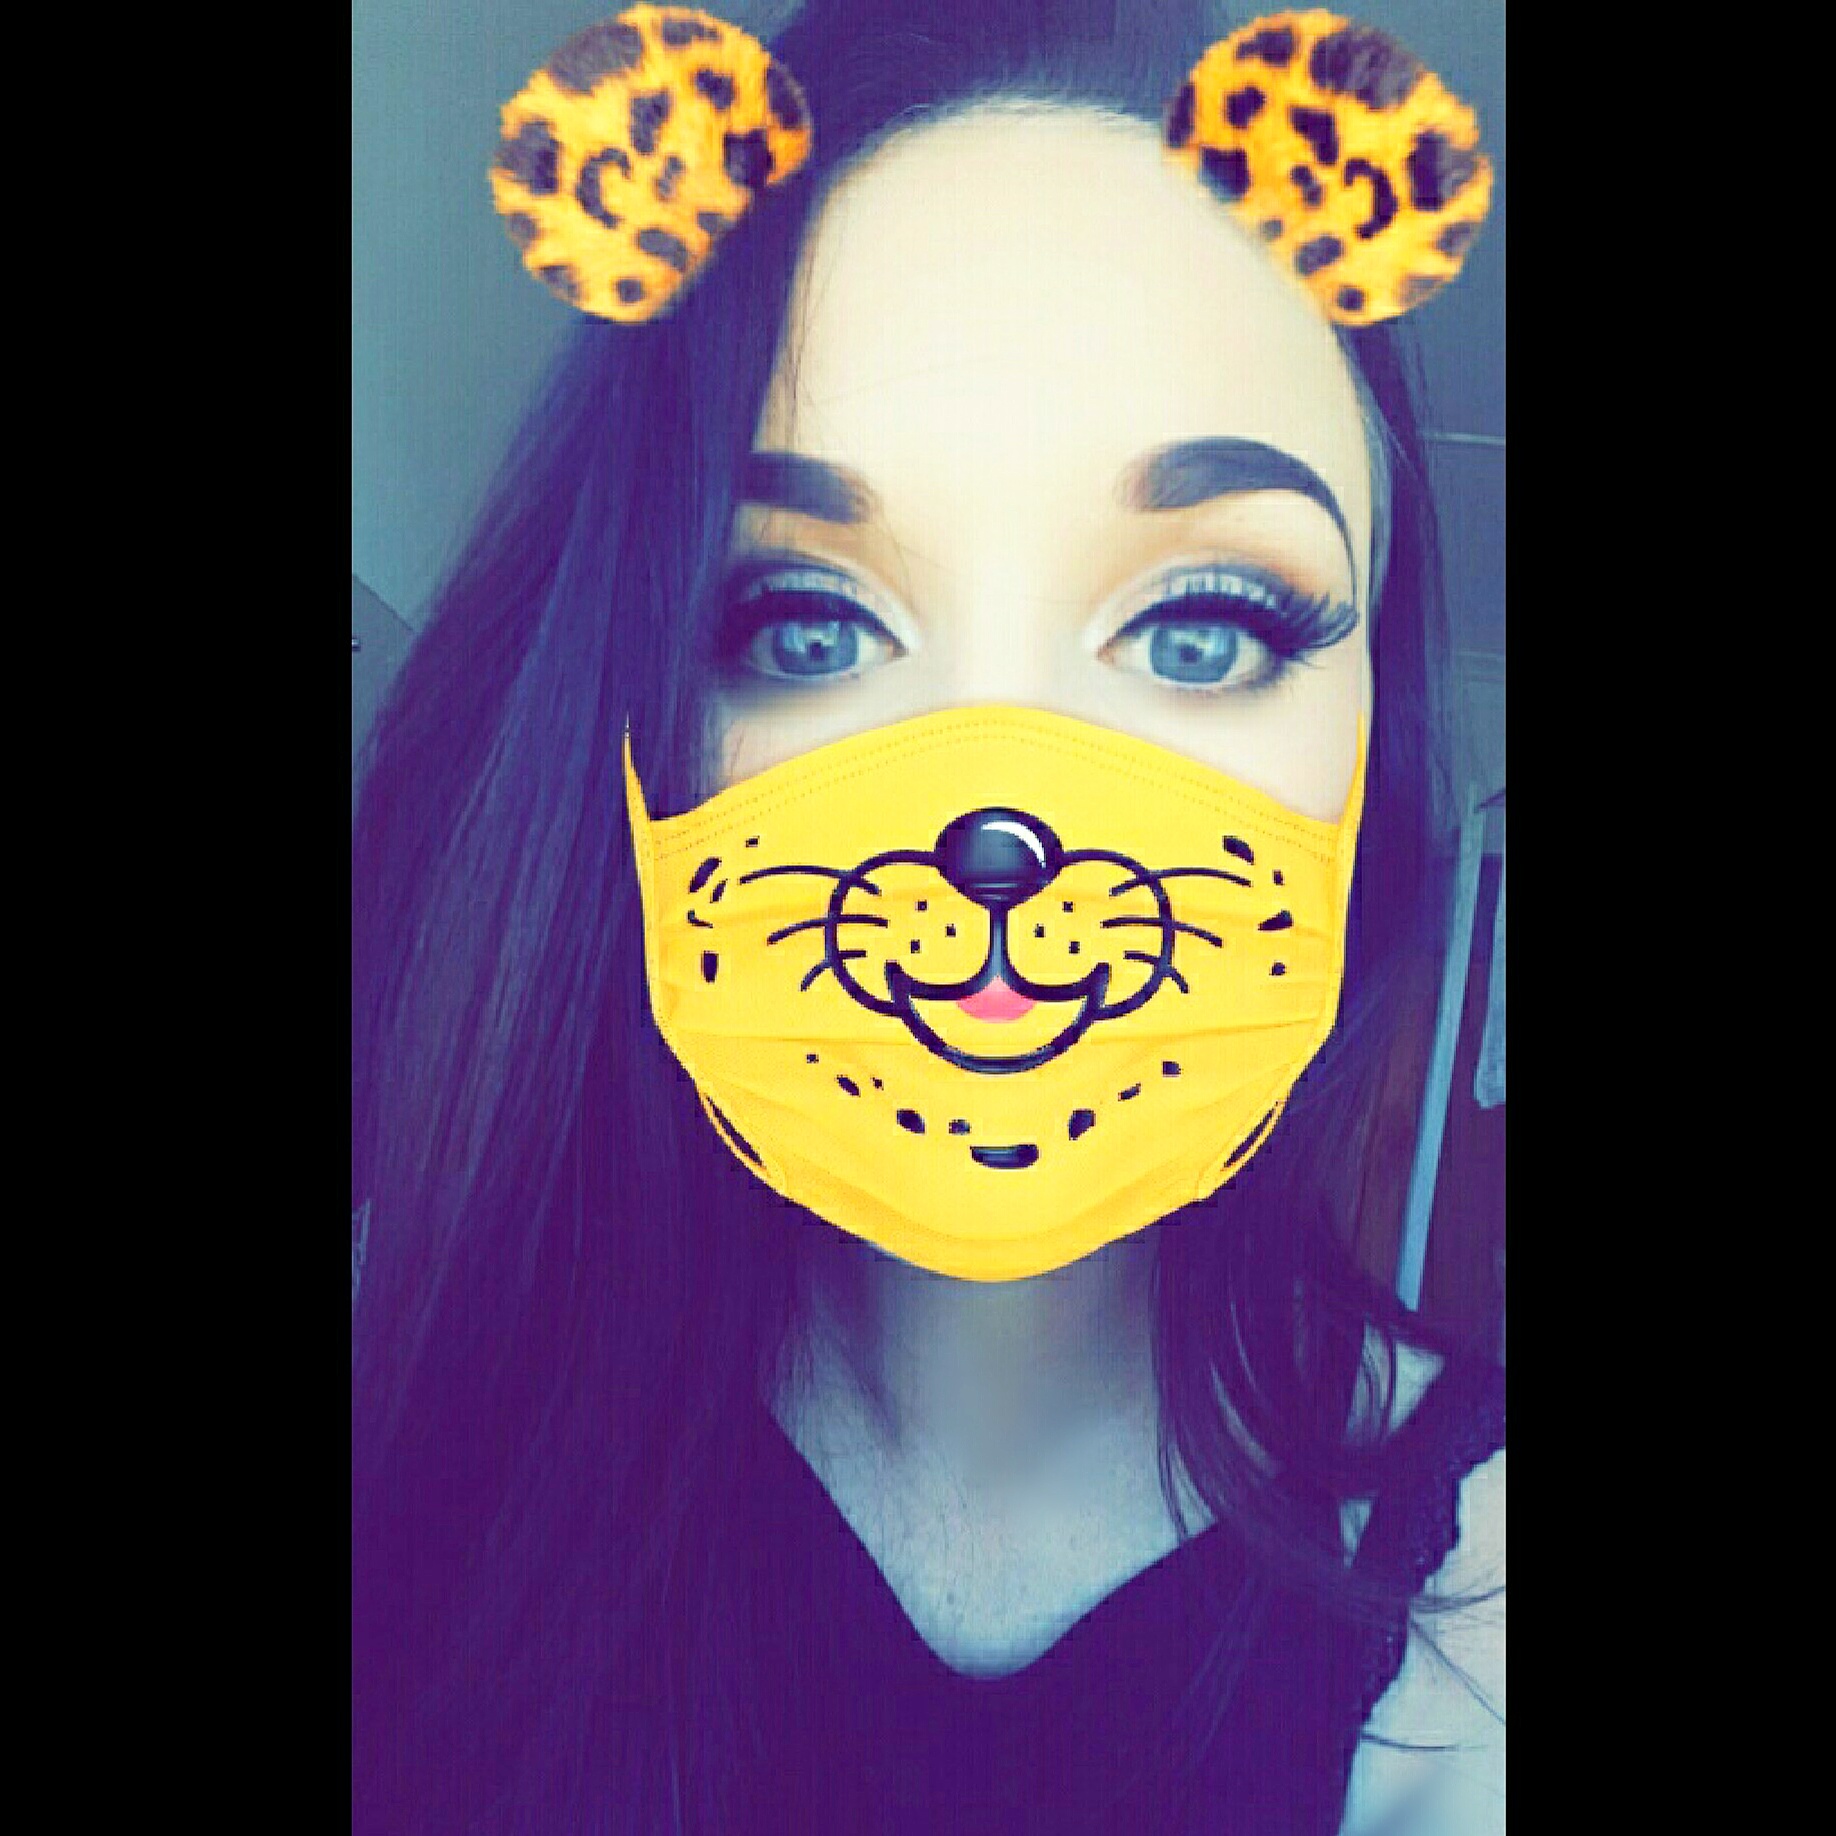 Having fun with Snapchat filters!! ♡.